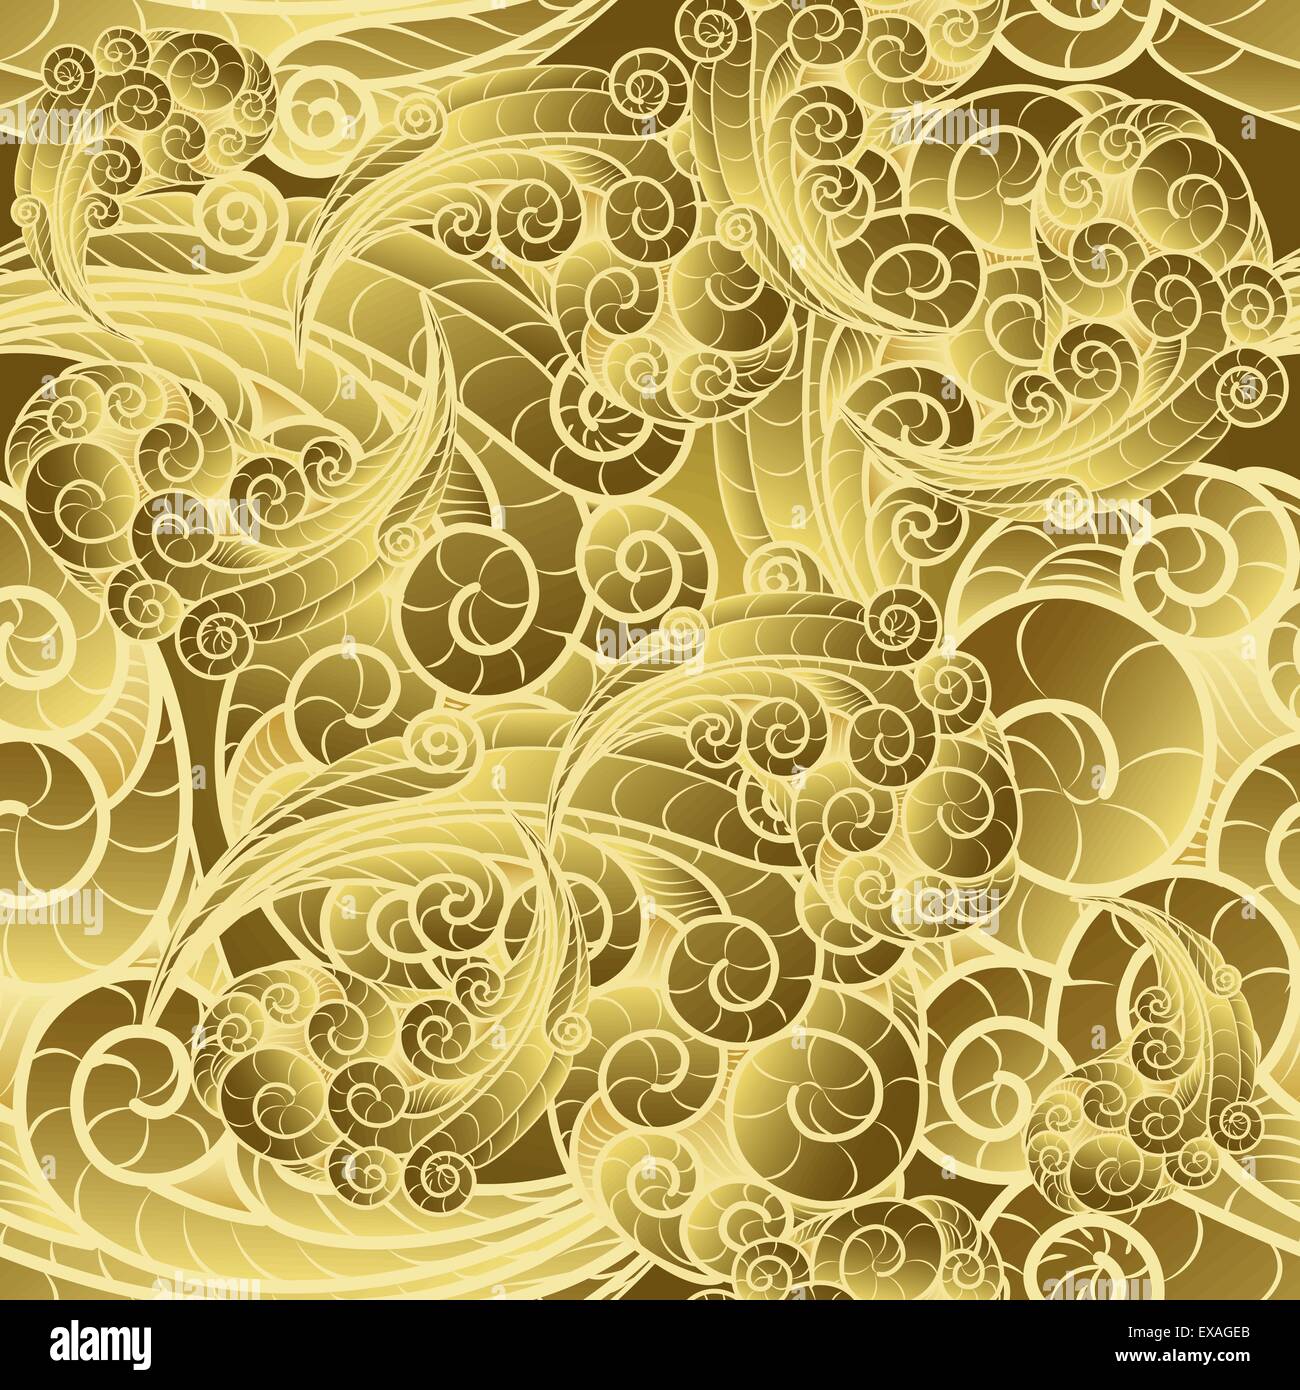 Vintage gold swirl seamless wall paper pattern. Stock Vector